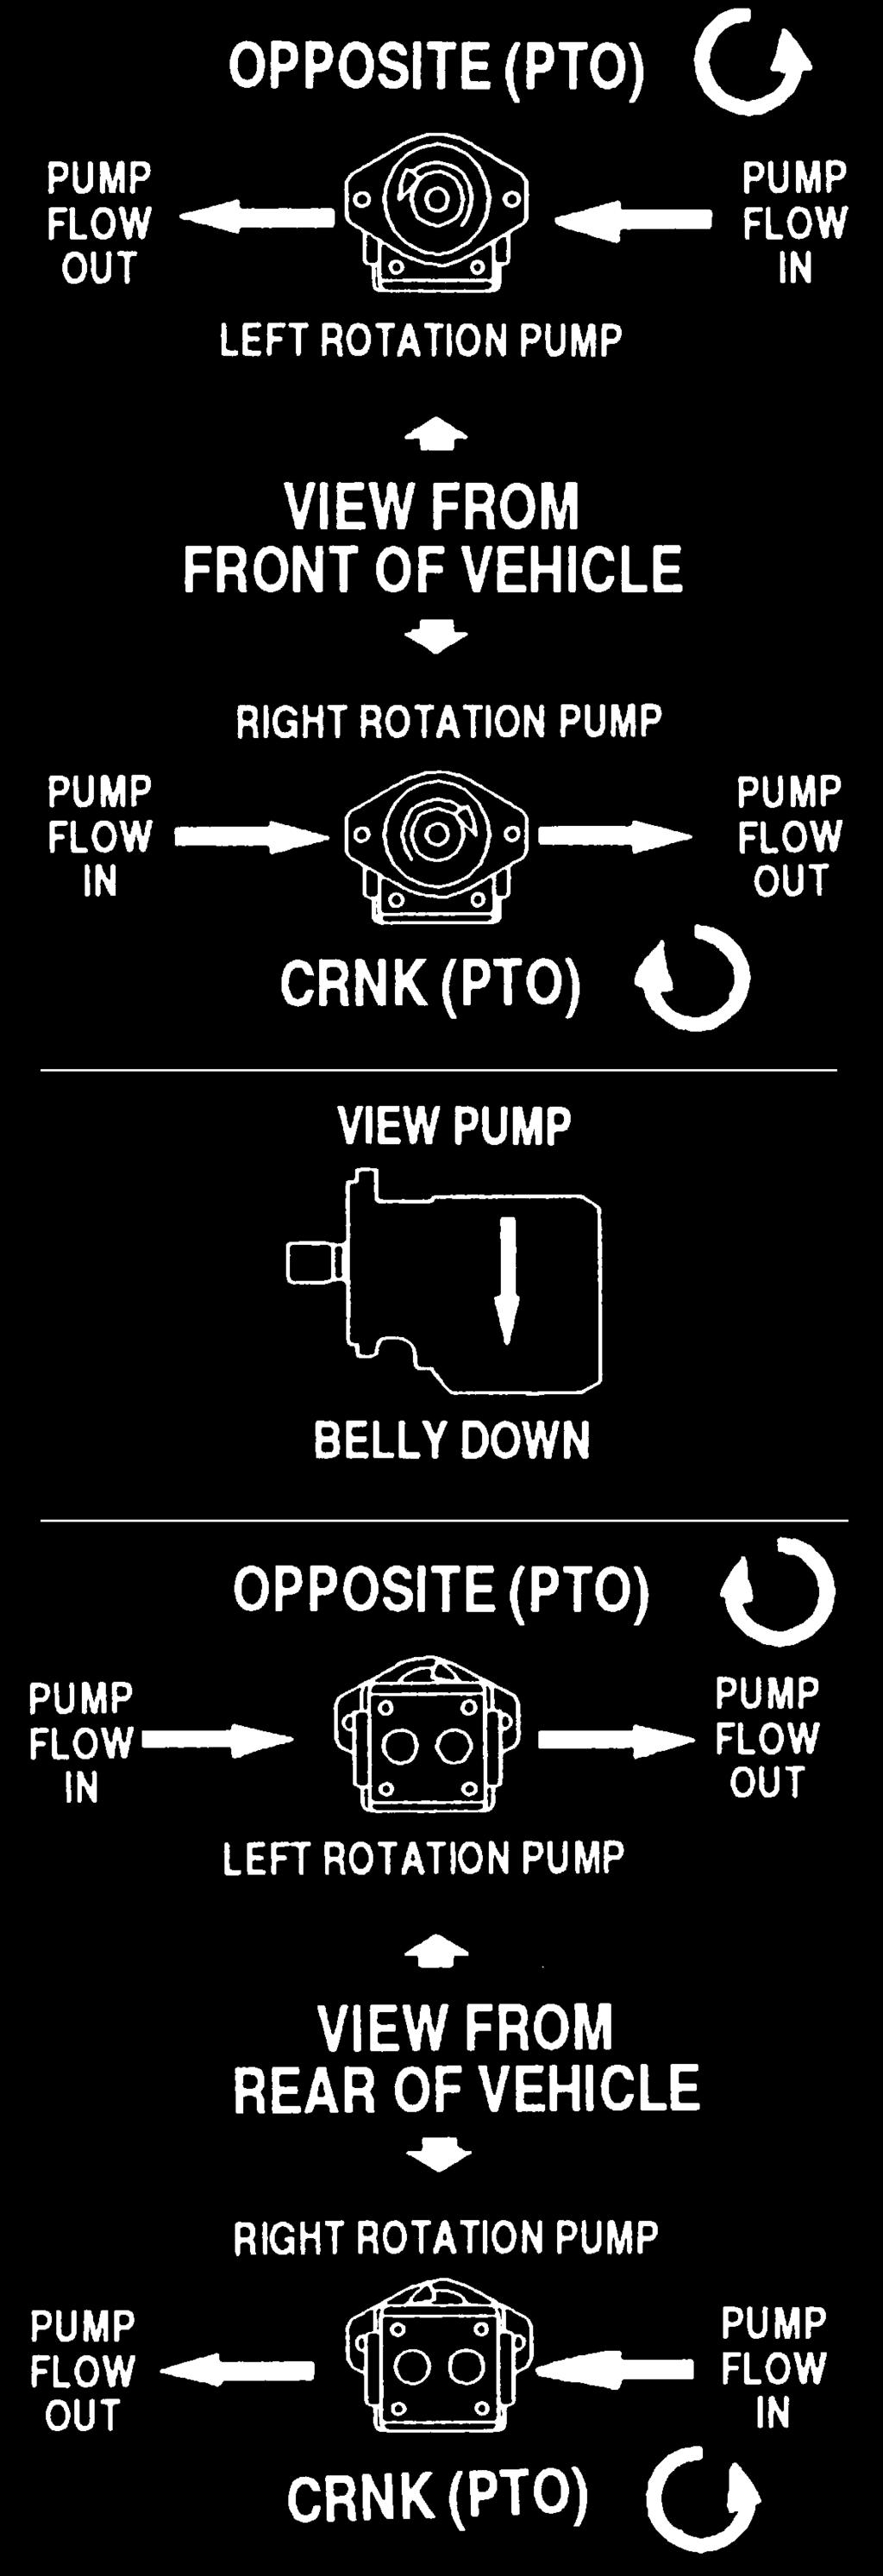 SECTION 3: PUMPS PUMPS PRODUCE FLOW PUMPS DO NOT PRODUCE PRESSURE PRESSURE RESULTS WHEN FLOW MEETS RESISTANCE Hydraulic pumps take the mechanical energy of the prime mover (a turning force) and